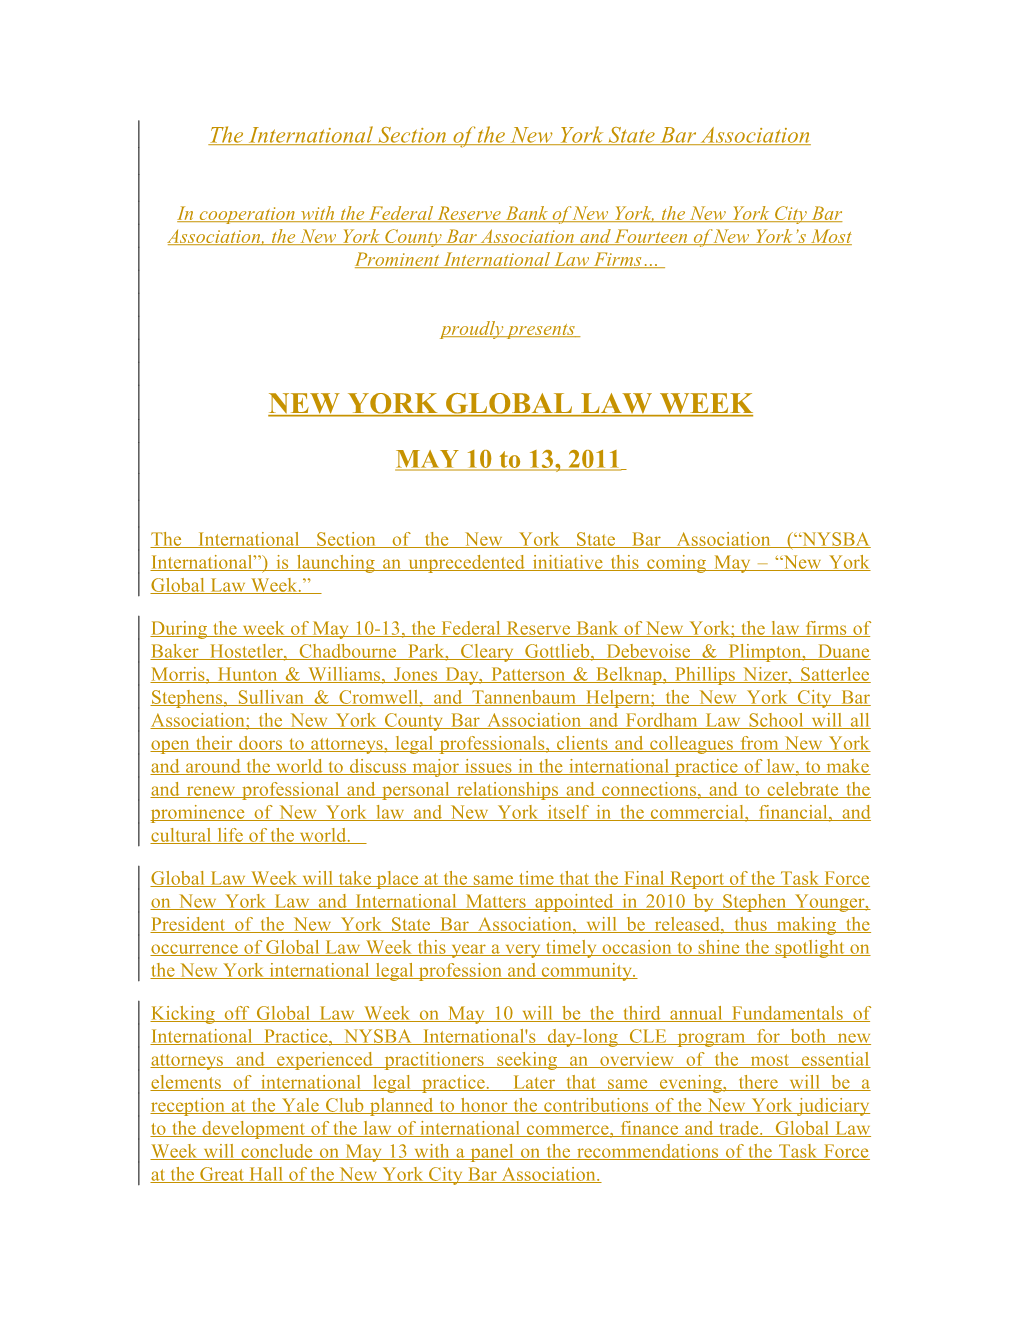 The International Section of the New York State Bar Association